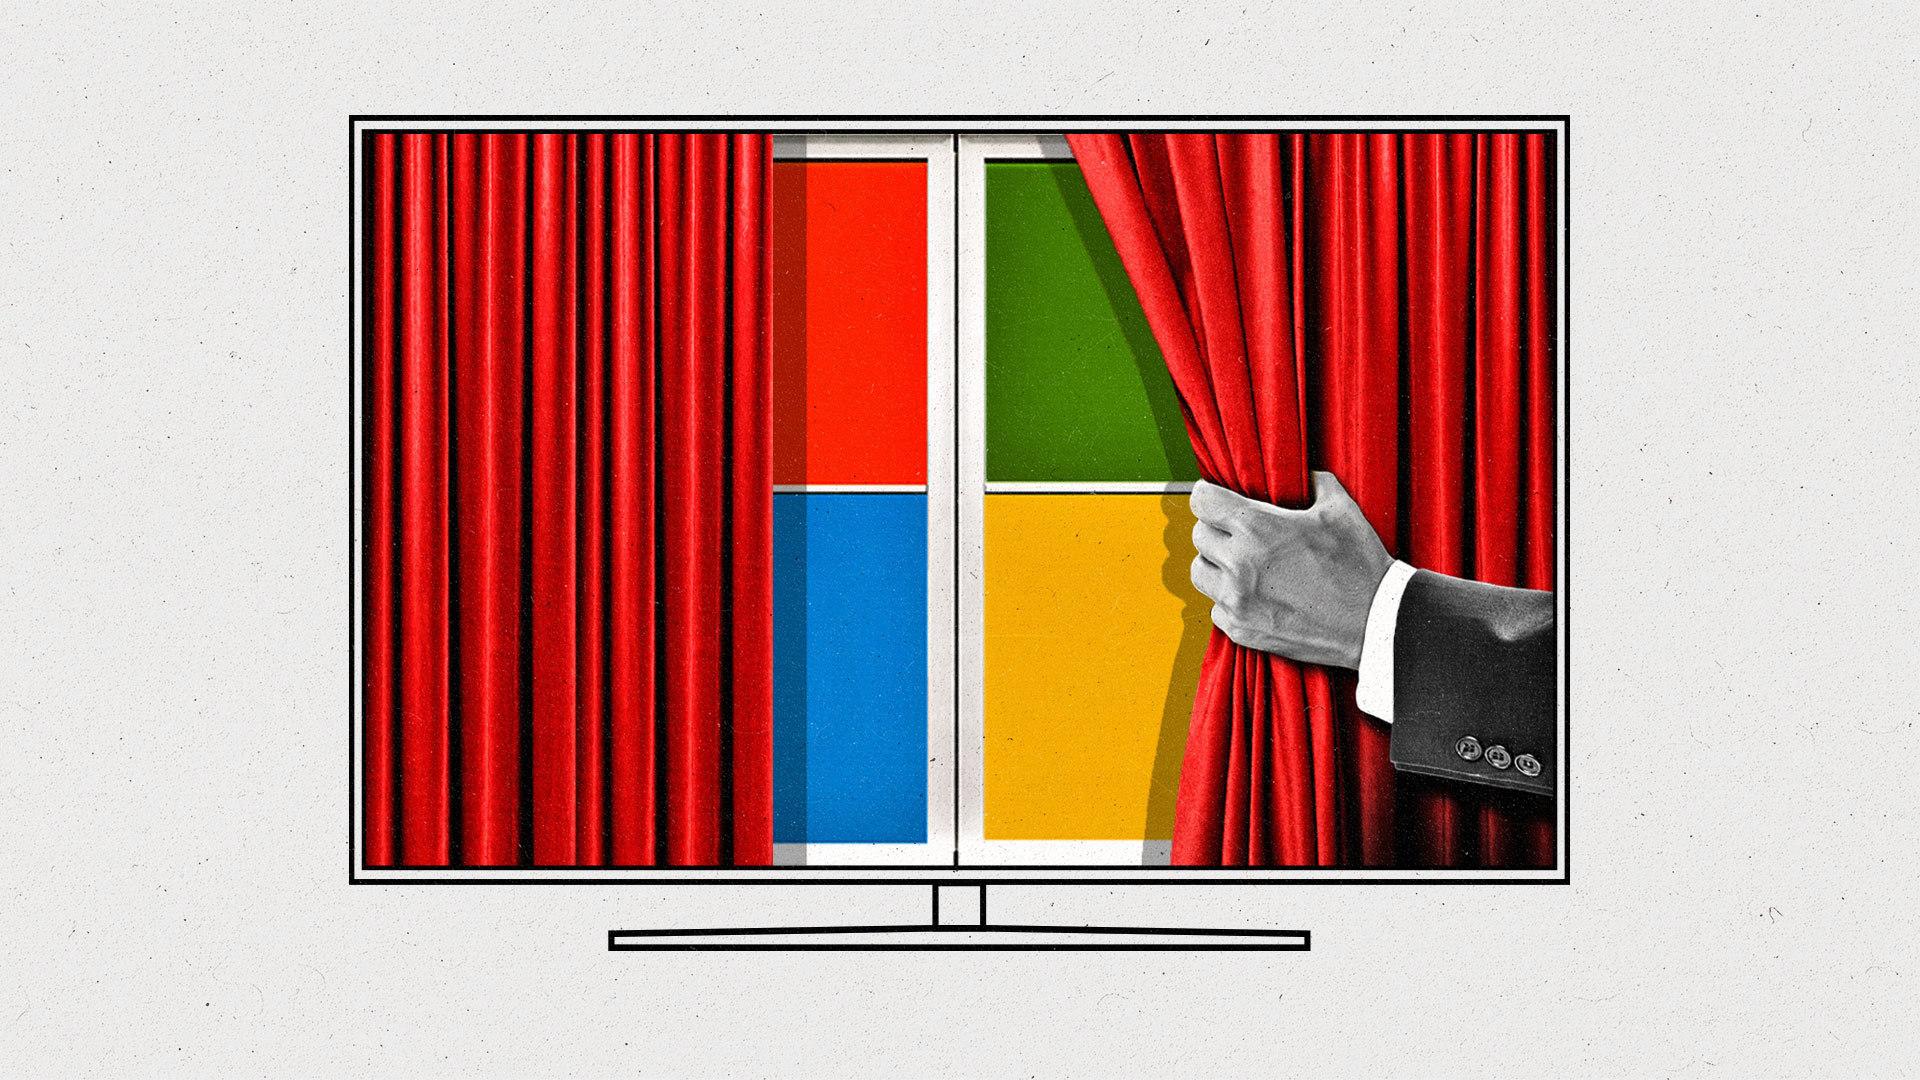 Netflix teams up with Microsoft in a move applauded by advertisers